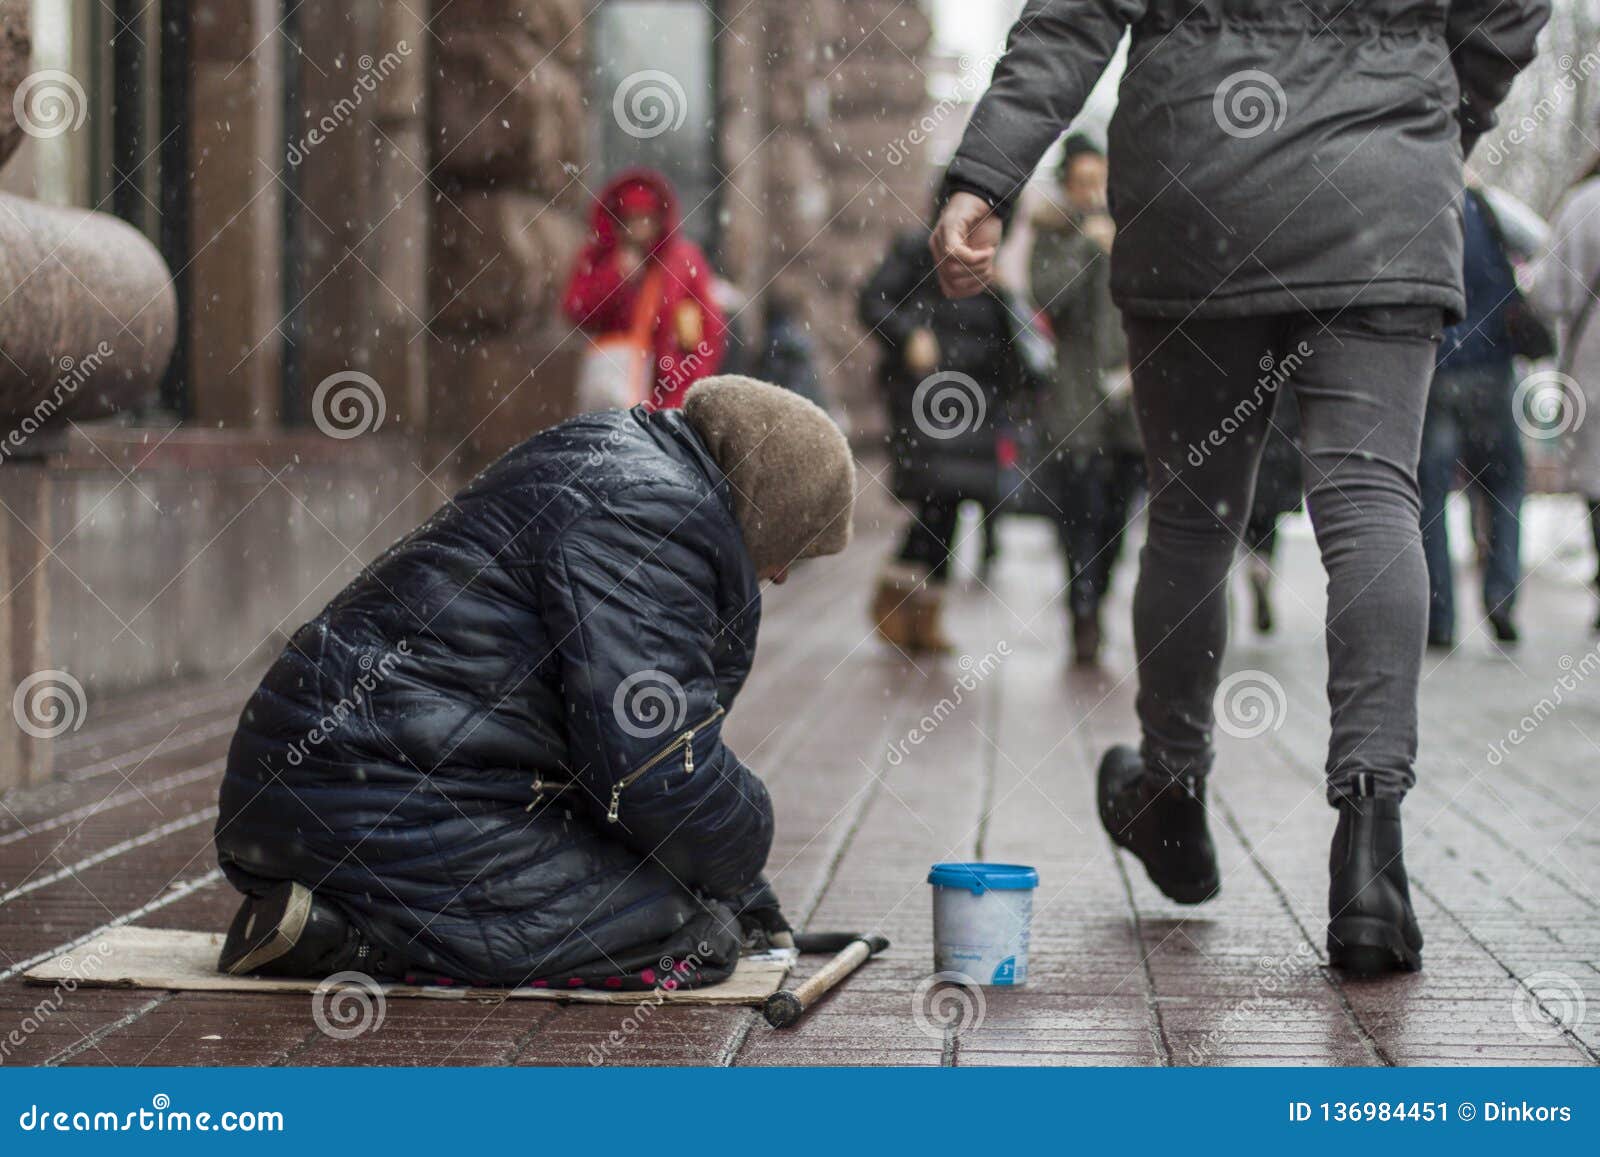 Hungry Homeless Beggar Woman Beg For Money On The Urban Street In The City From People Walking 